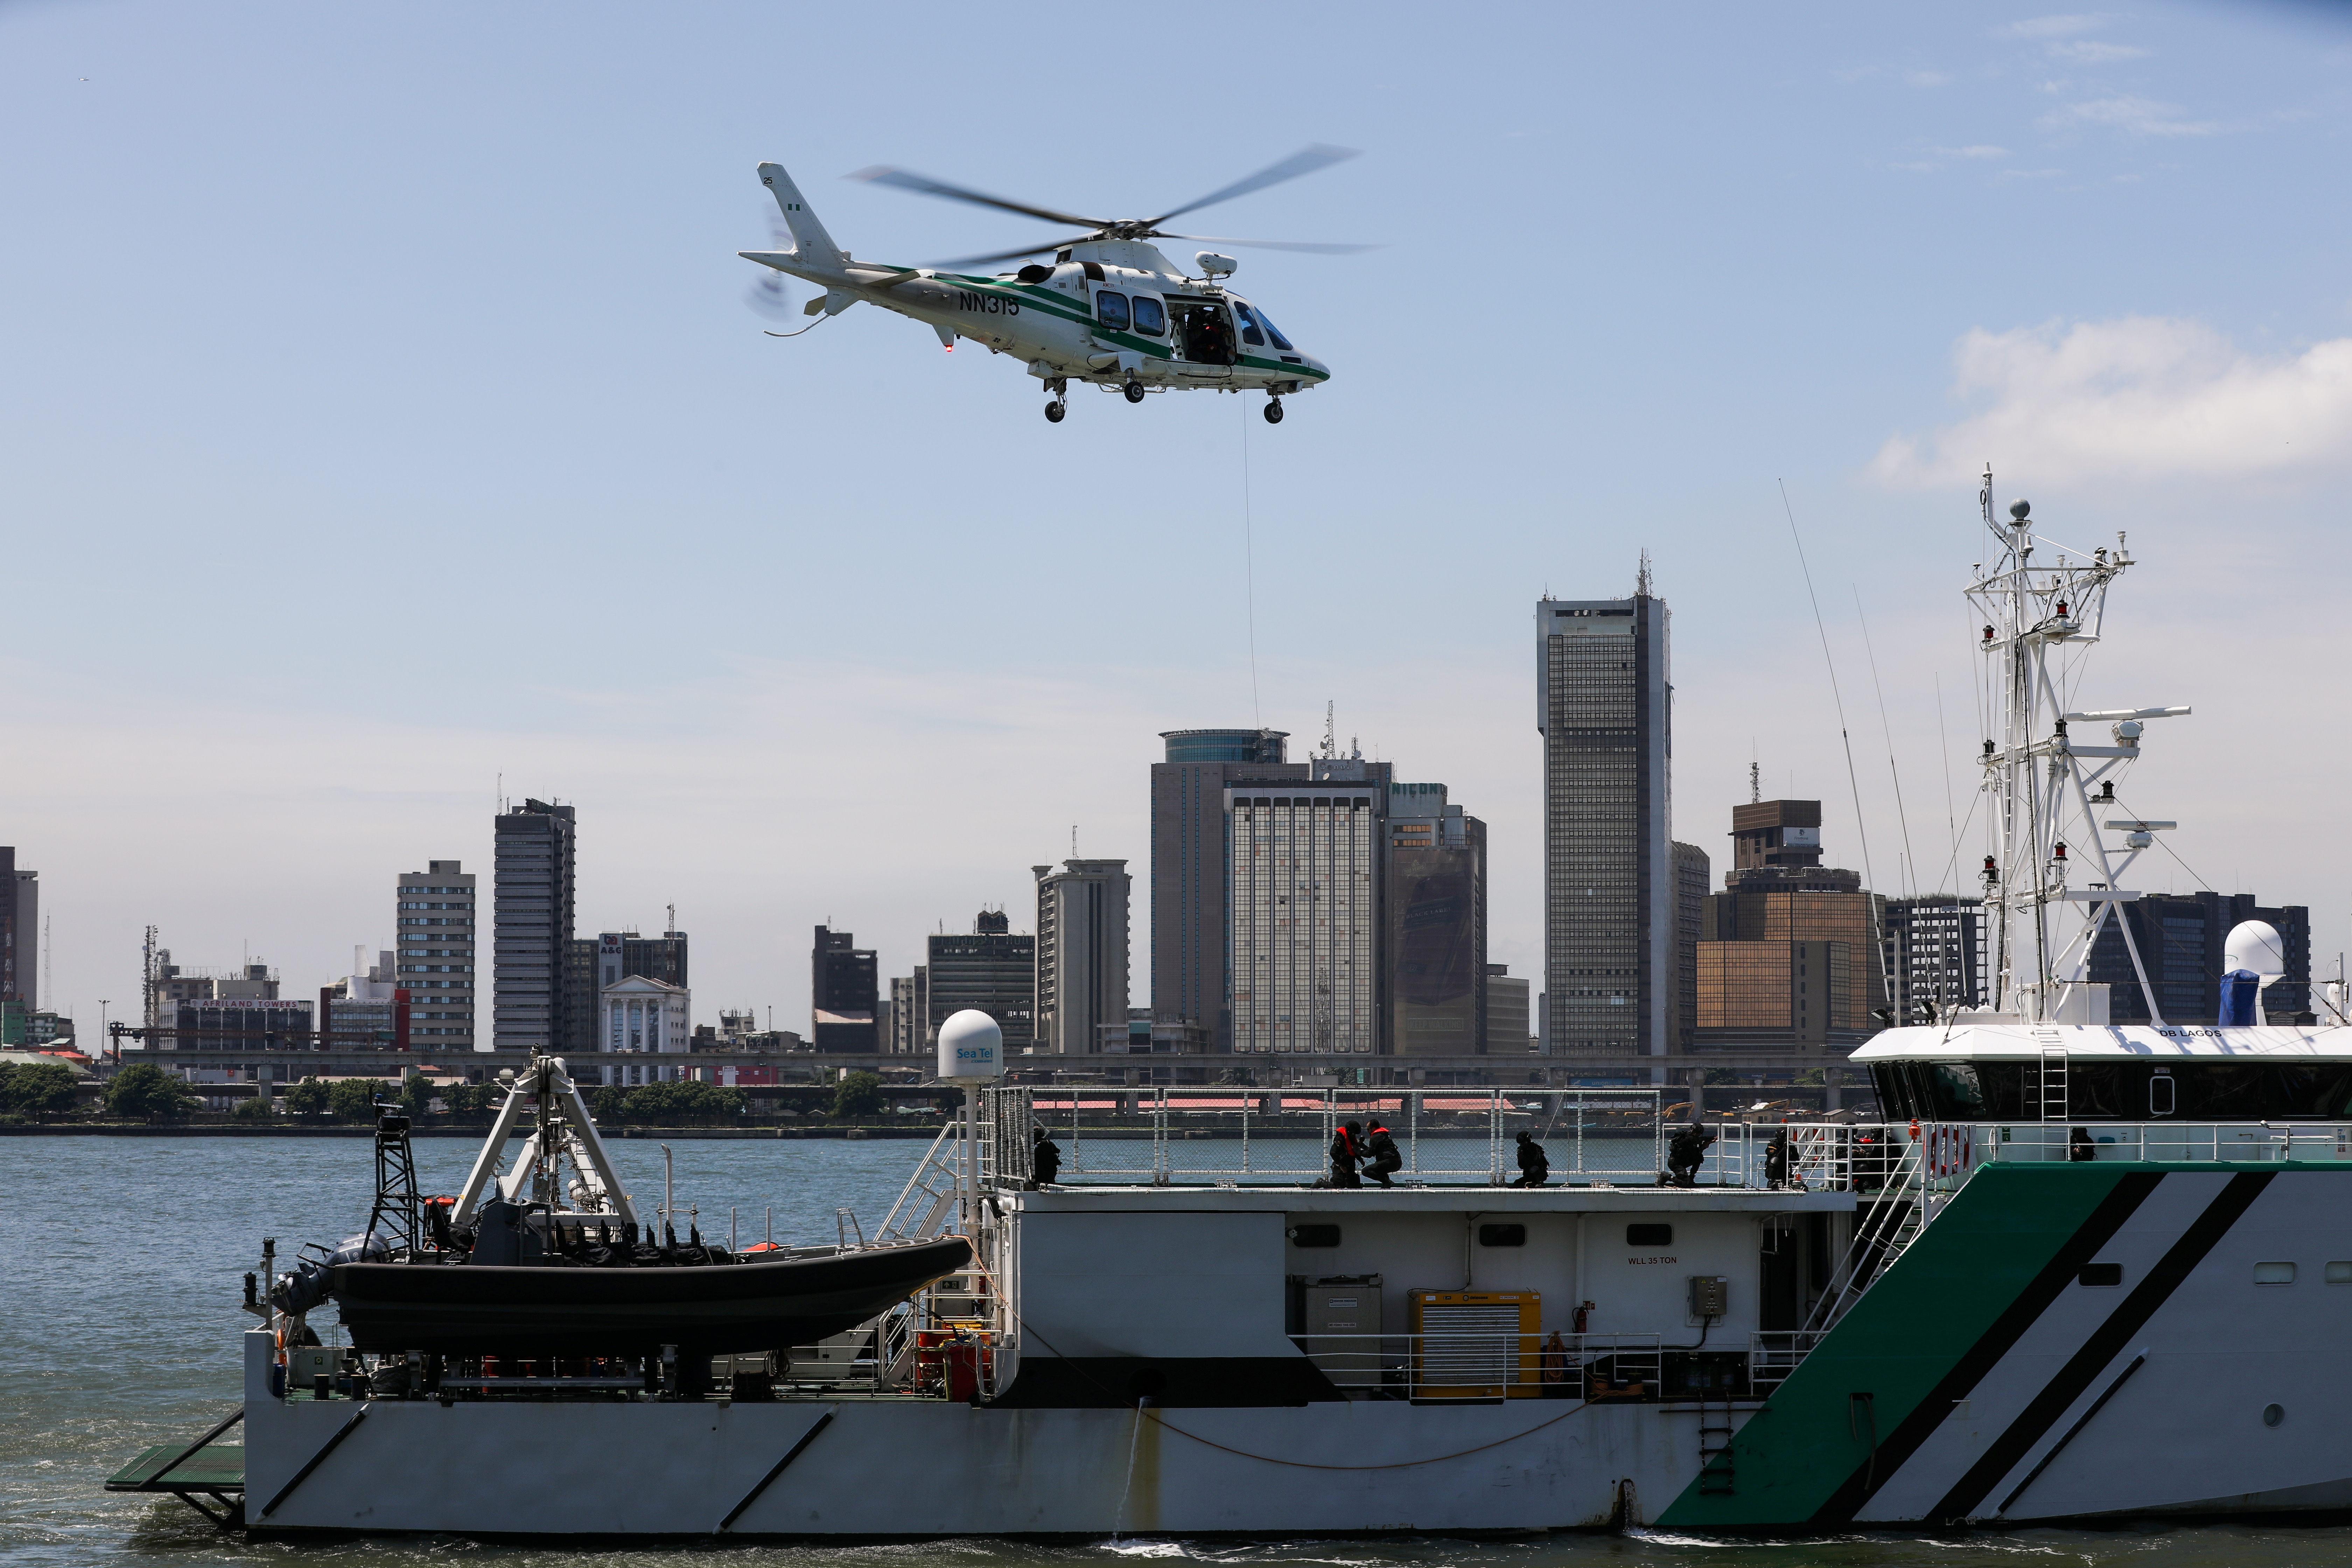 A helicopter from the Maritime Security Unit prepares to rescue members of the unit as they stage an anti-piracy drill during the launch of the Deep Blue project by the Nigerian government in Apapa, Lagos